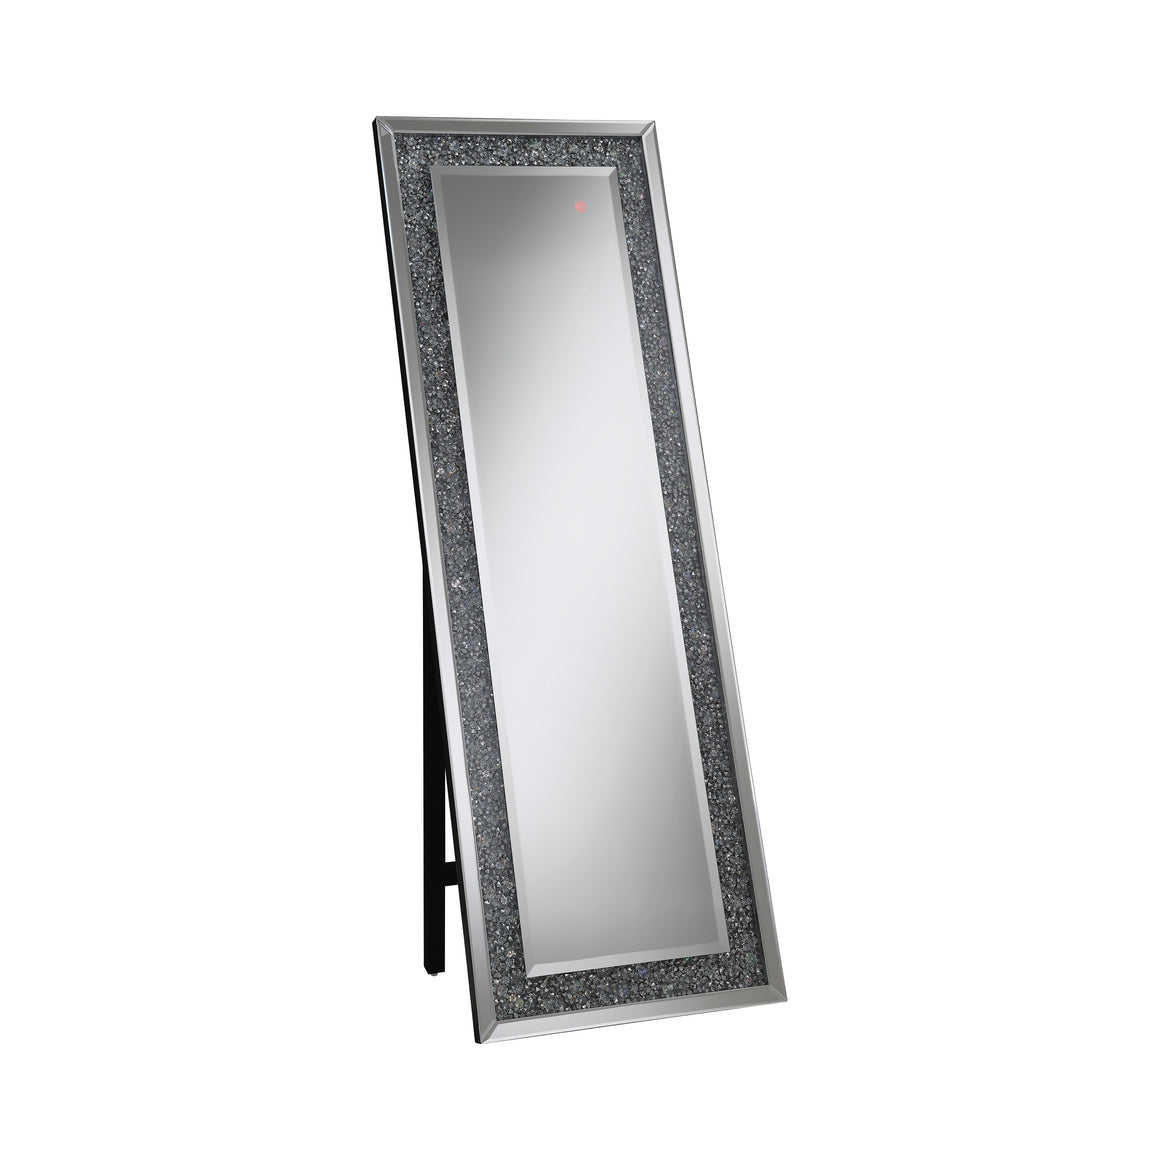 Carisi Rectangular Standing Mirror with LED Lighting - Silver